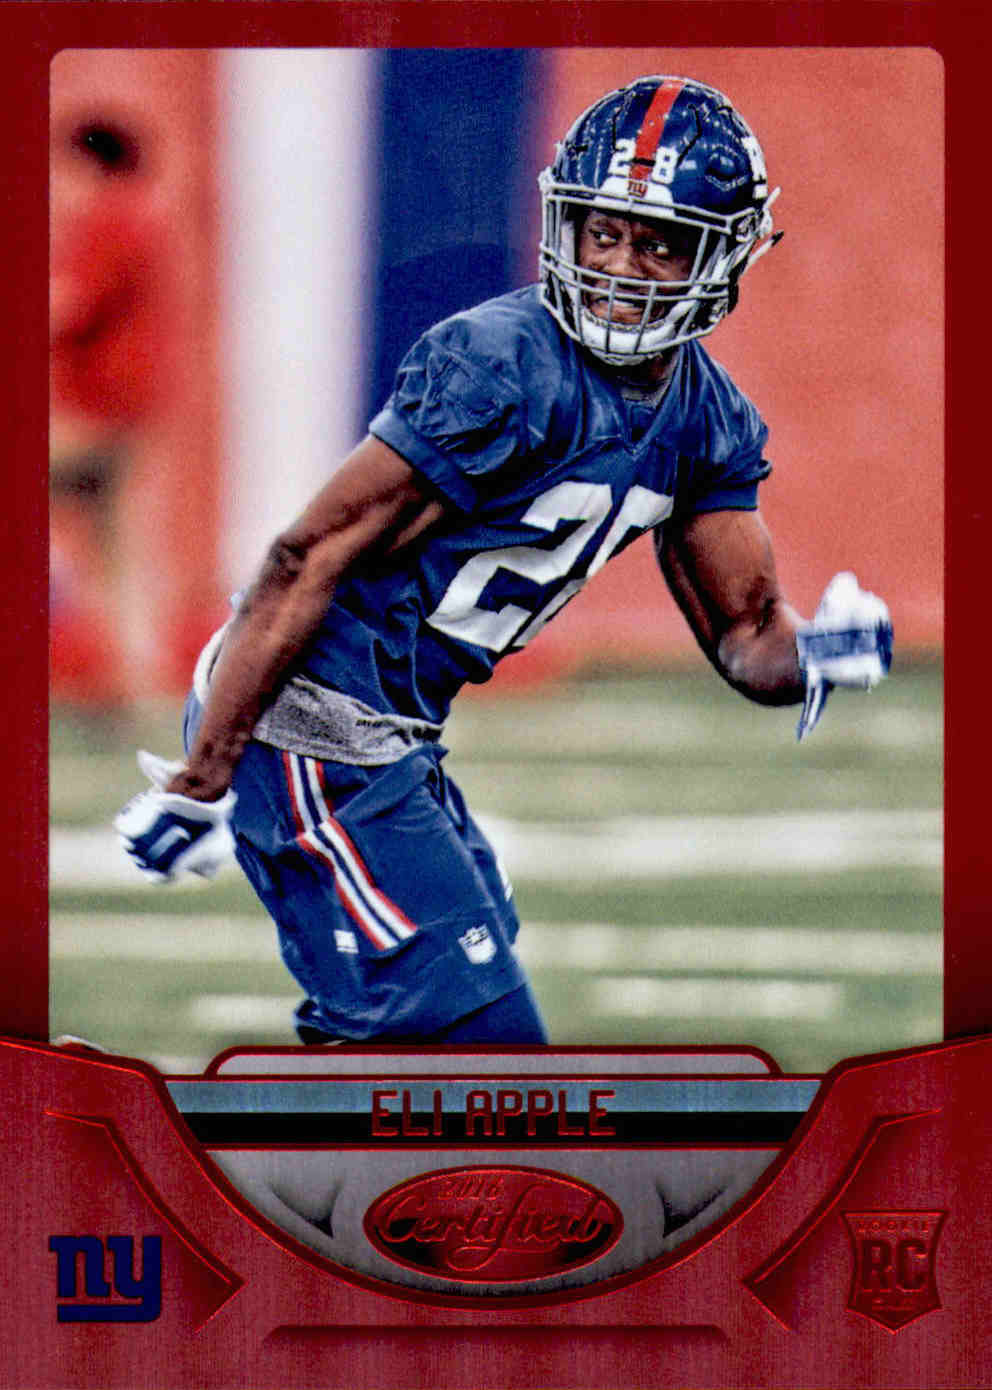 2016 Certified Mirror Red #166 Eli Apple Rare SP Rookie RC Card 63/99 . rookie card picture